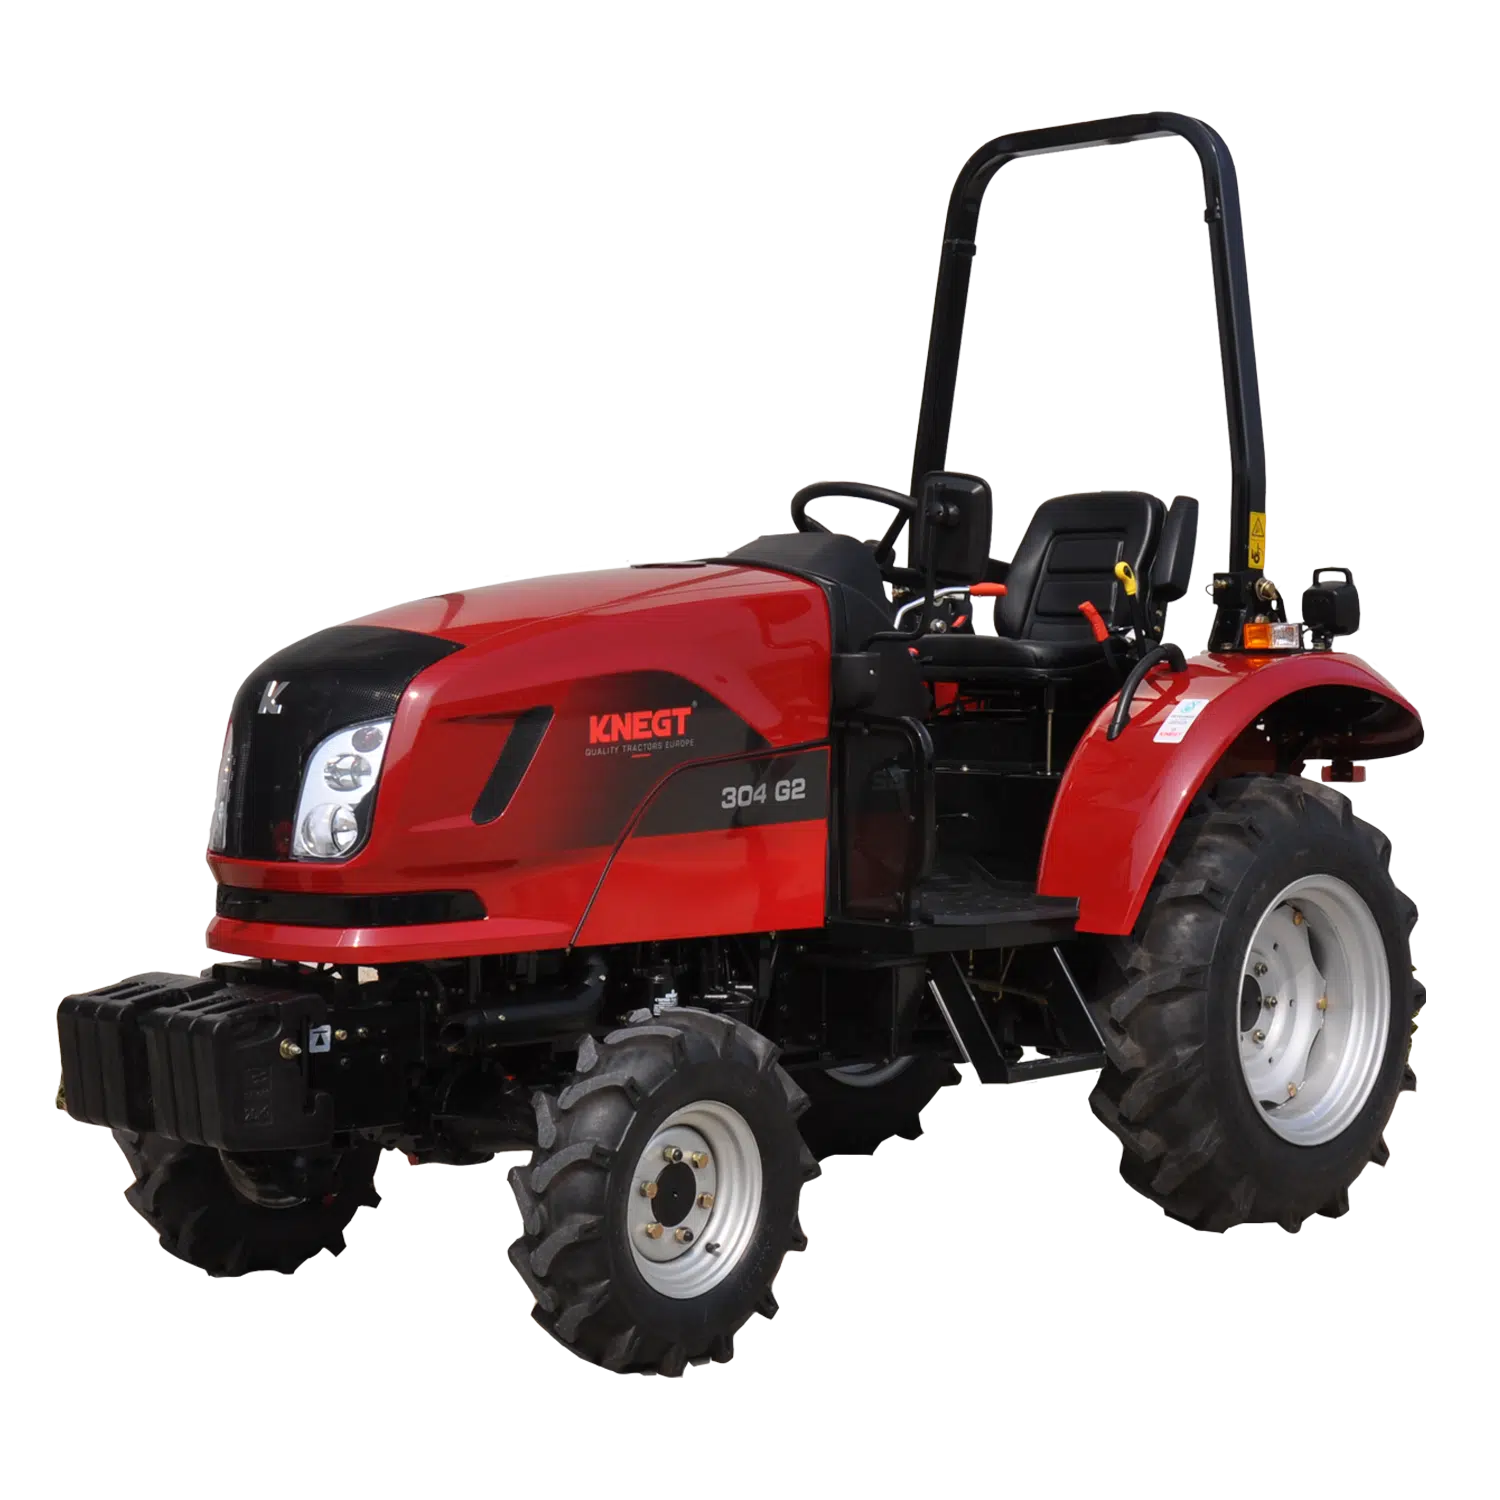 knegt_compact_tractor_304g2_product_foto_schuin (1)